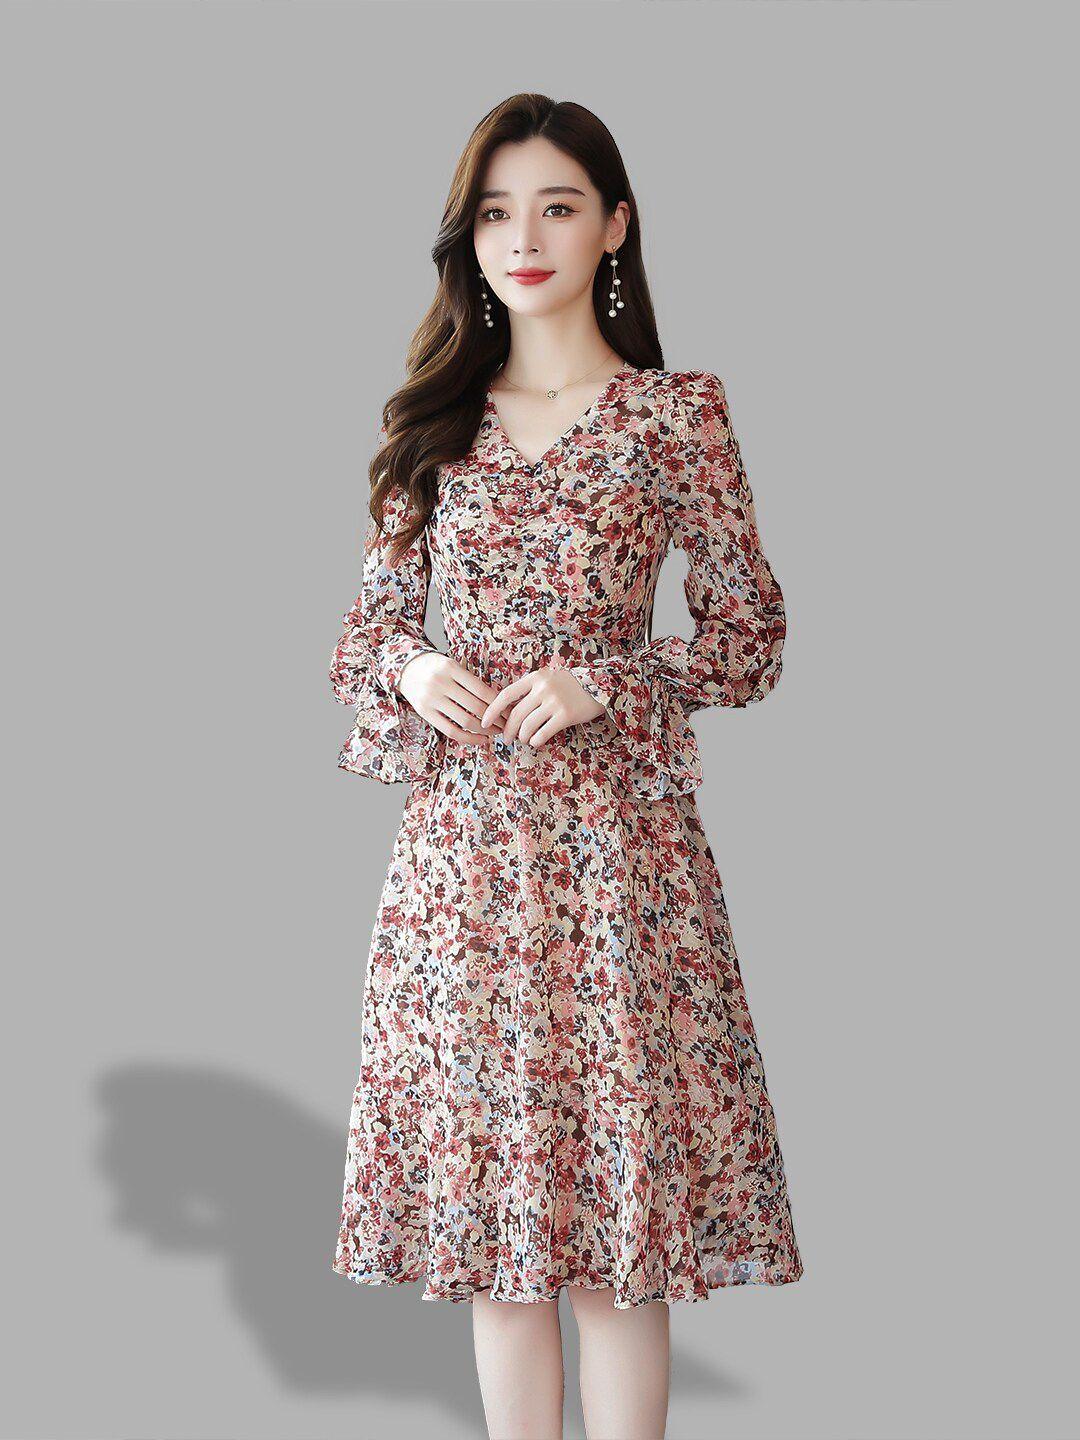 jc collection pink floral dress